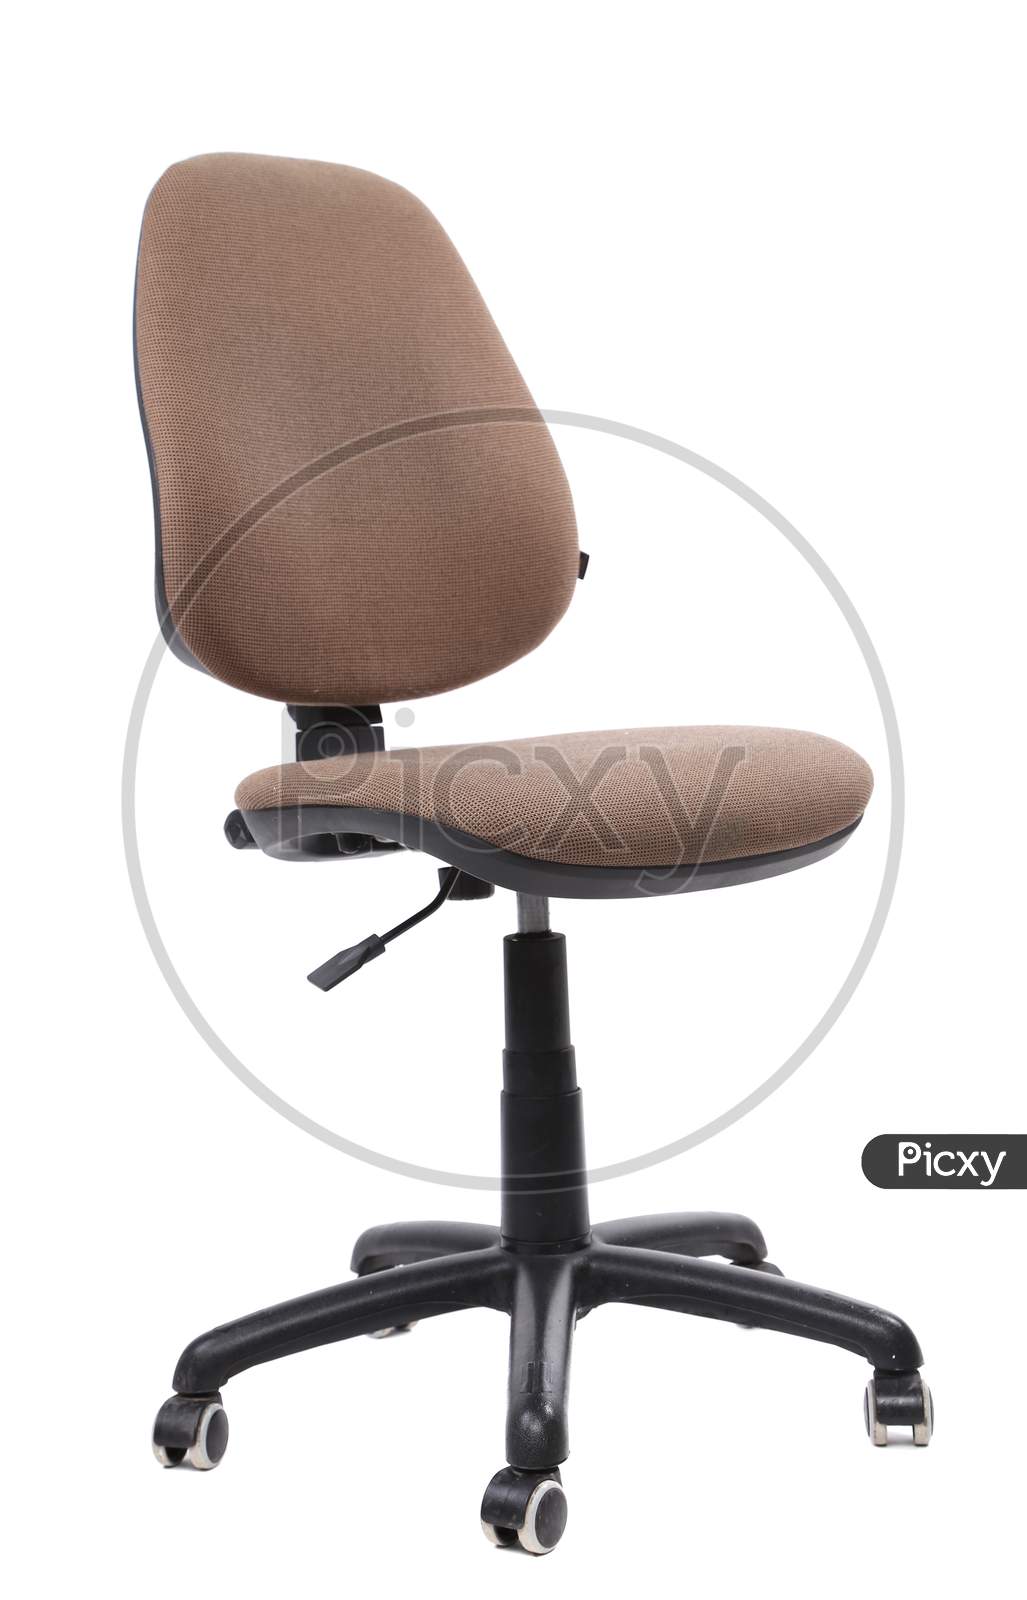 Beige Office Chair. Isolated On A White Background.